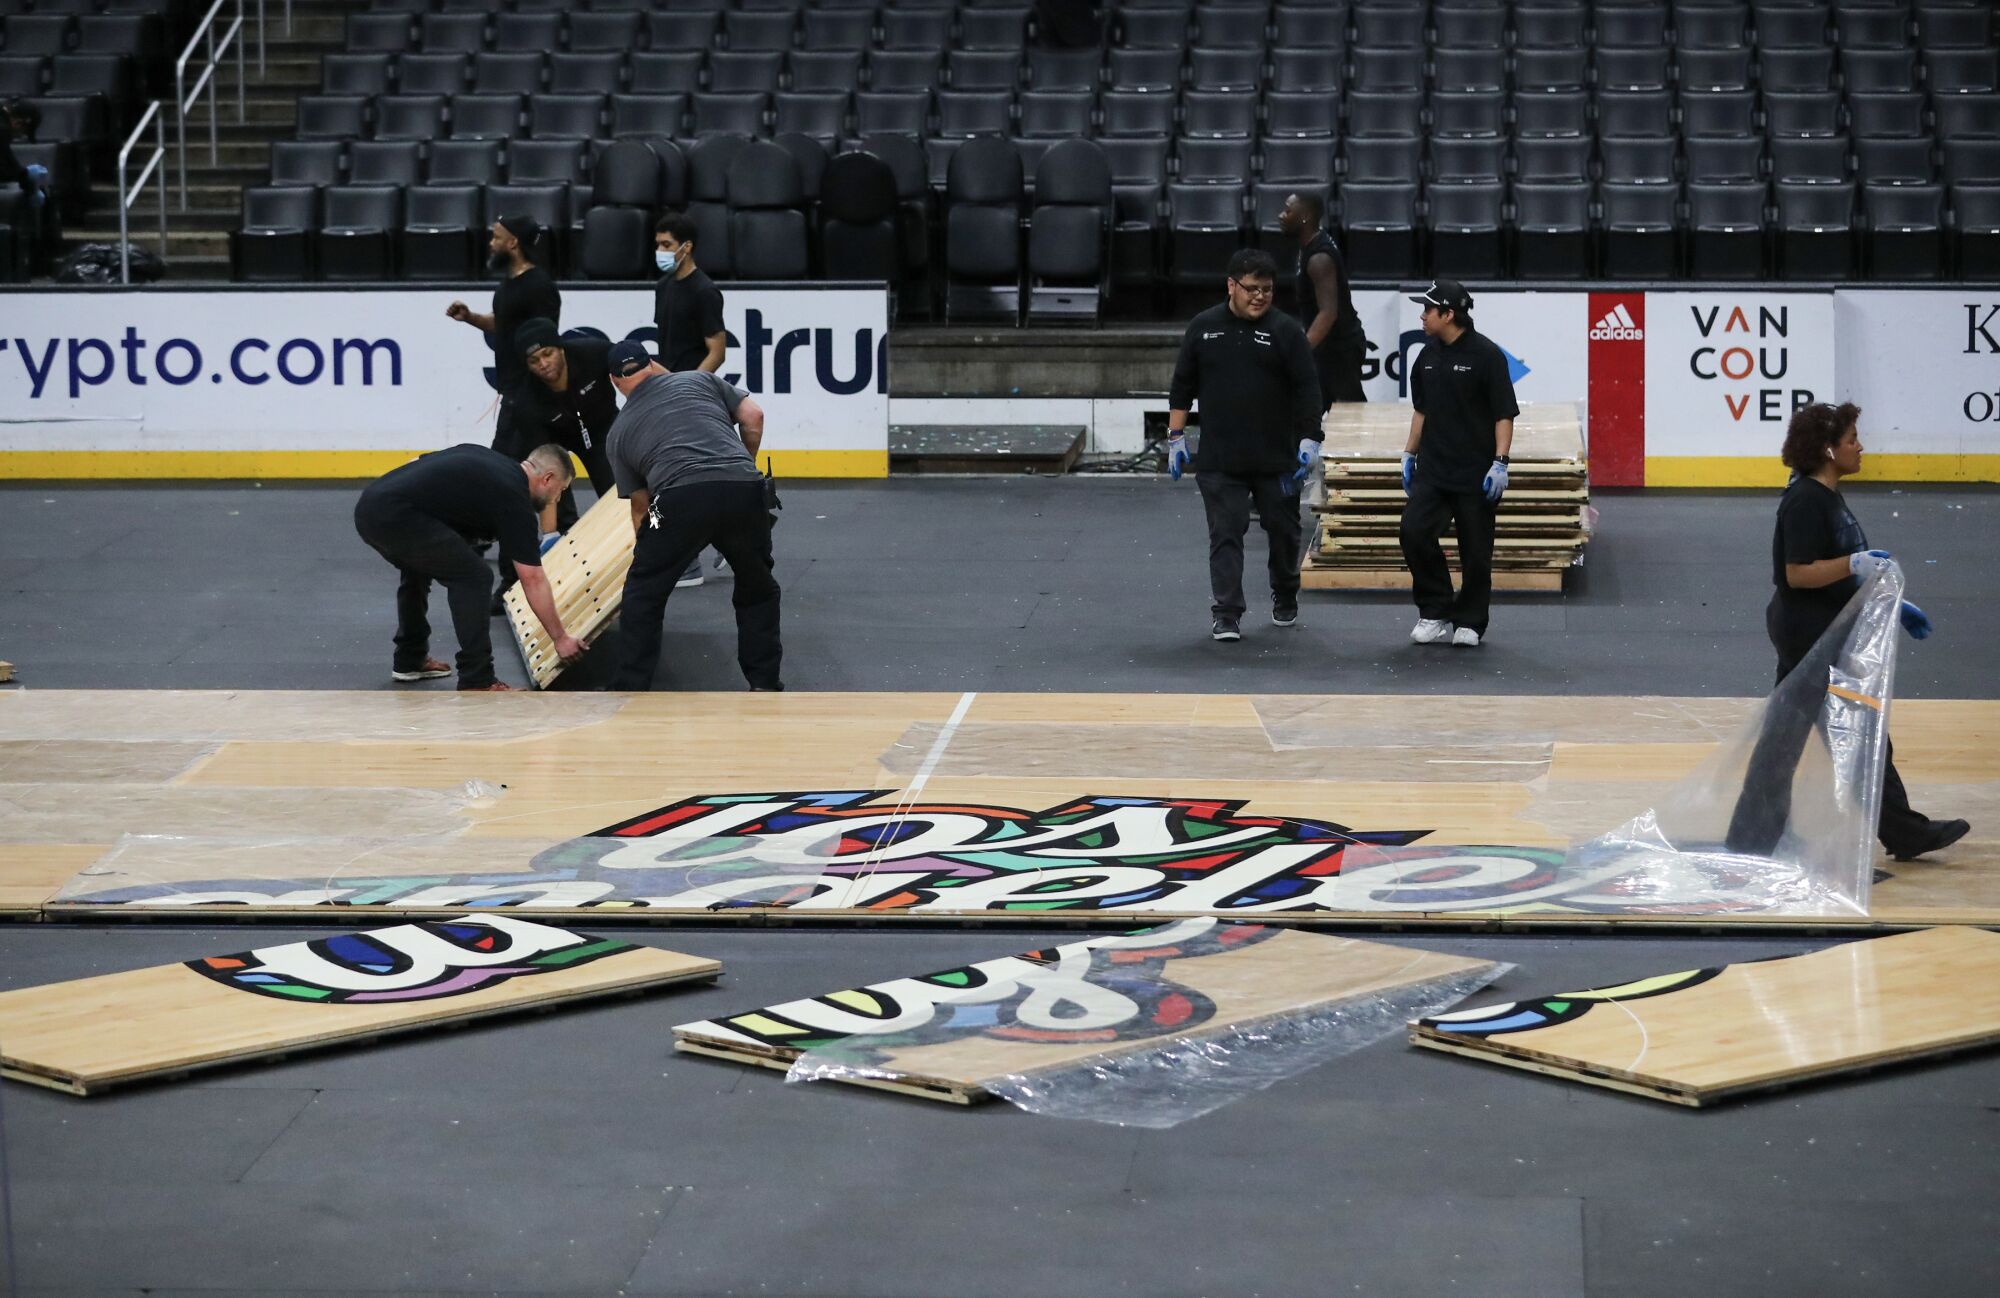 Employees change over Crypto.com Arena playing surfaces from hardwood following an afternoon Clippers game to ice.